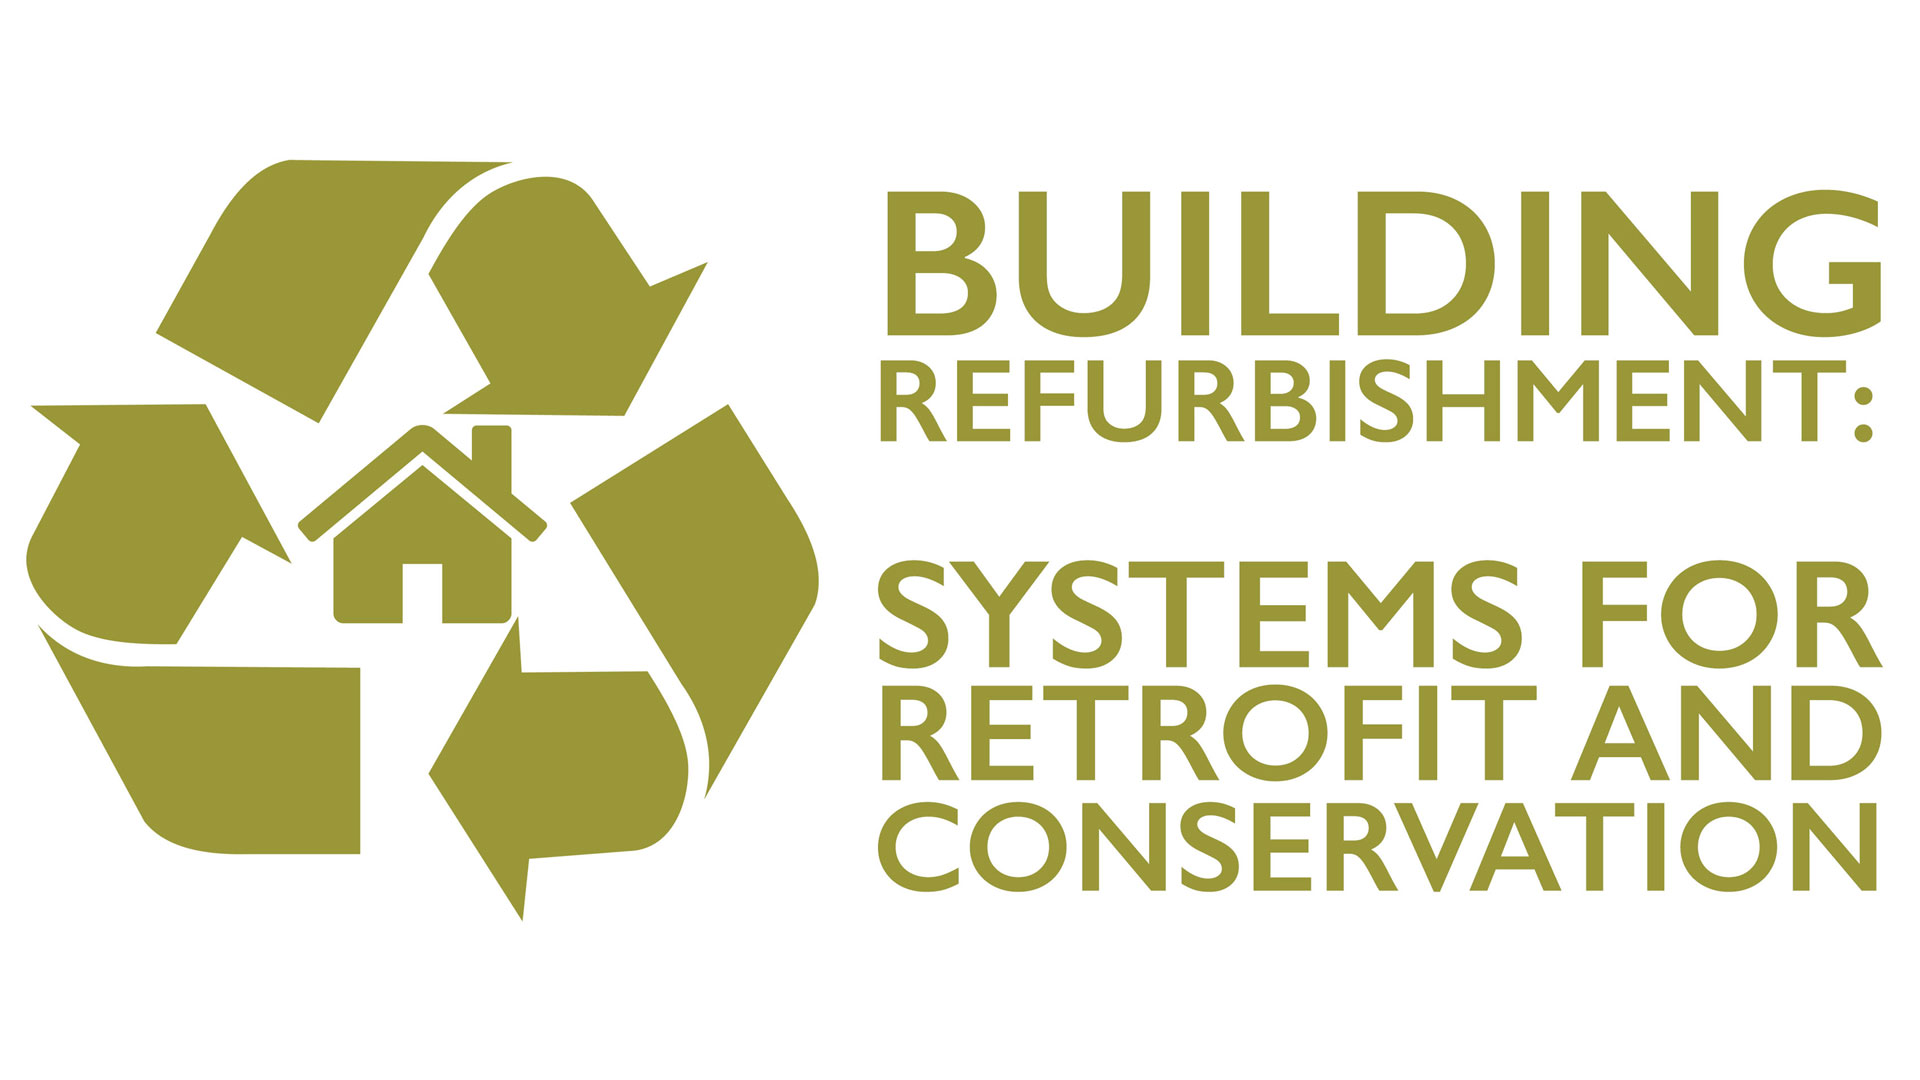 Welcome to our RIBA-assessed CPD webinar "Building Refurbishment, Systems for Retrofit & Conservation". The first of our RIBA-assessed CPD webinars provides an overview of the factors to consider in refurbishment and conservation projects, including the basics of building physics as related to hygrothermal design.